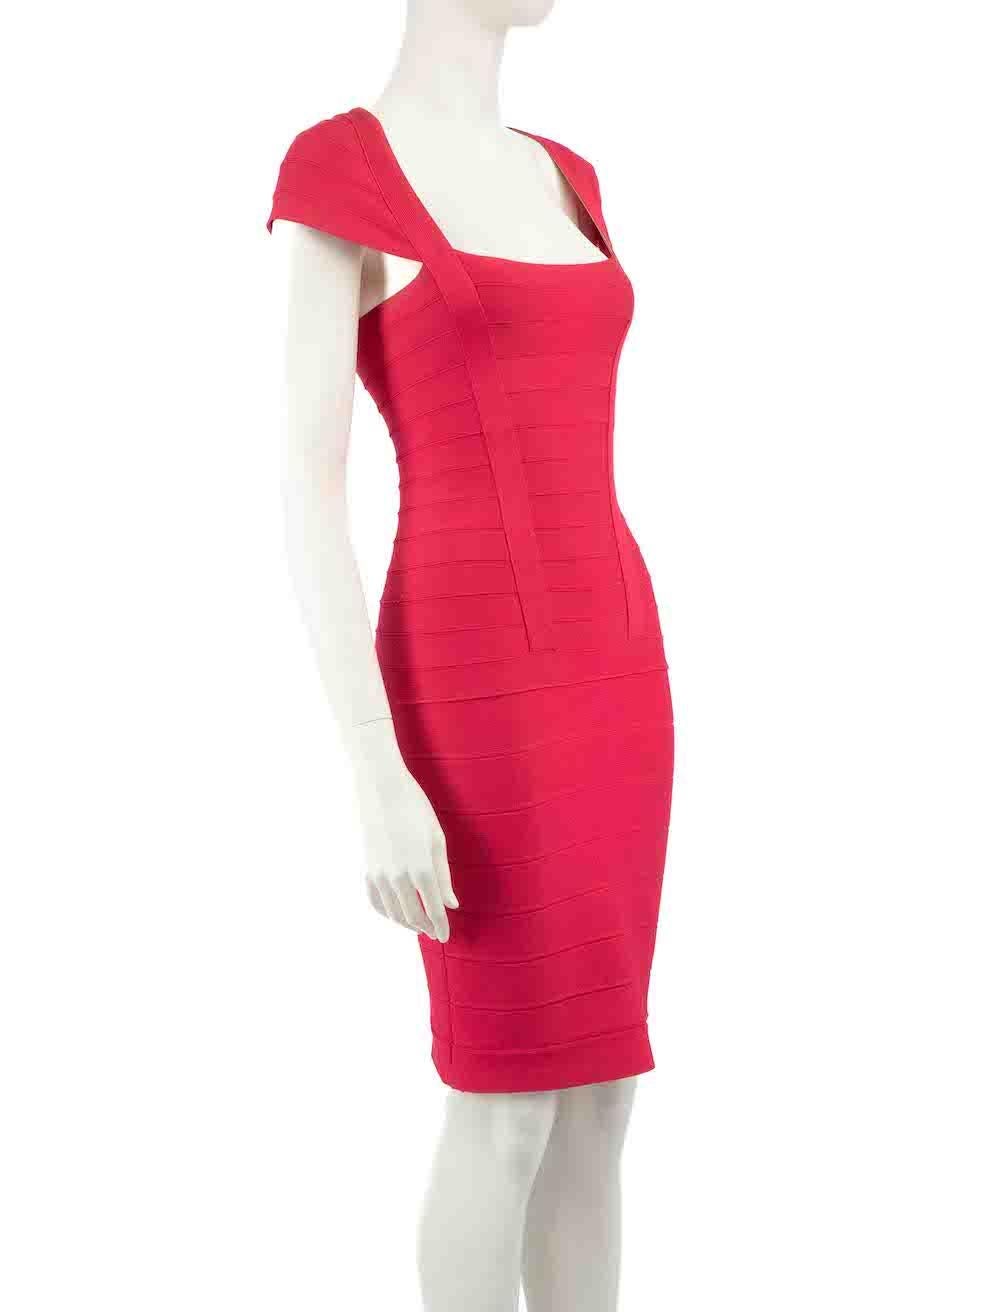 CONDITION is Good. General wear to dress is evident. Moderate signs of wear to the front and back with plucks and pilling to the weave. There is also a small mark to the bust on this used Herve Leger designer resale item.
 
 
 
 Details
 
 
 Pink
 
